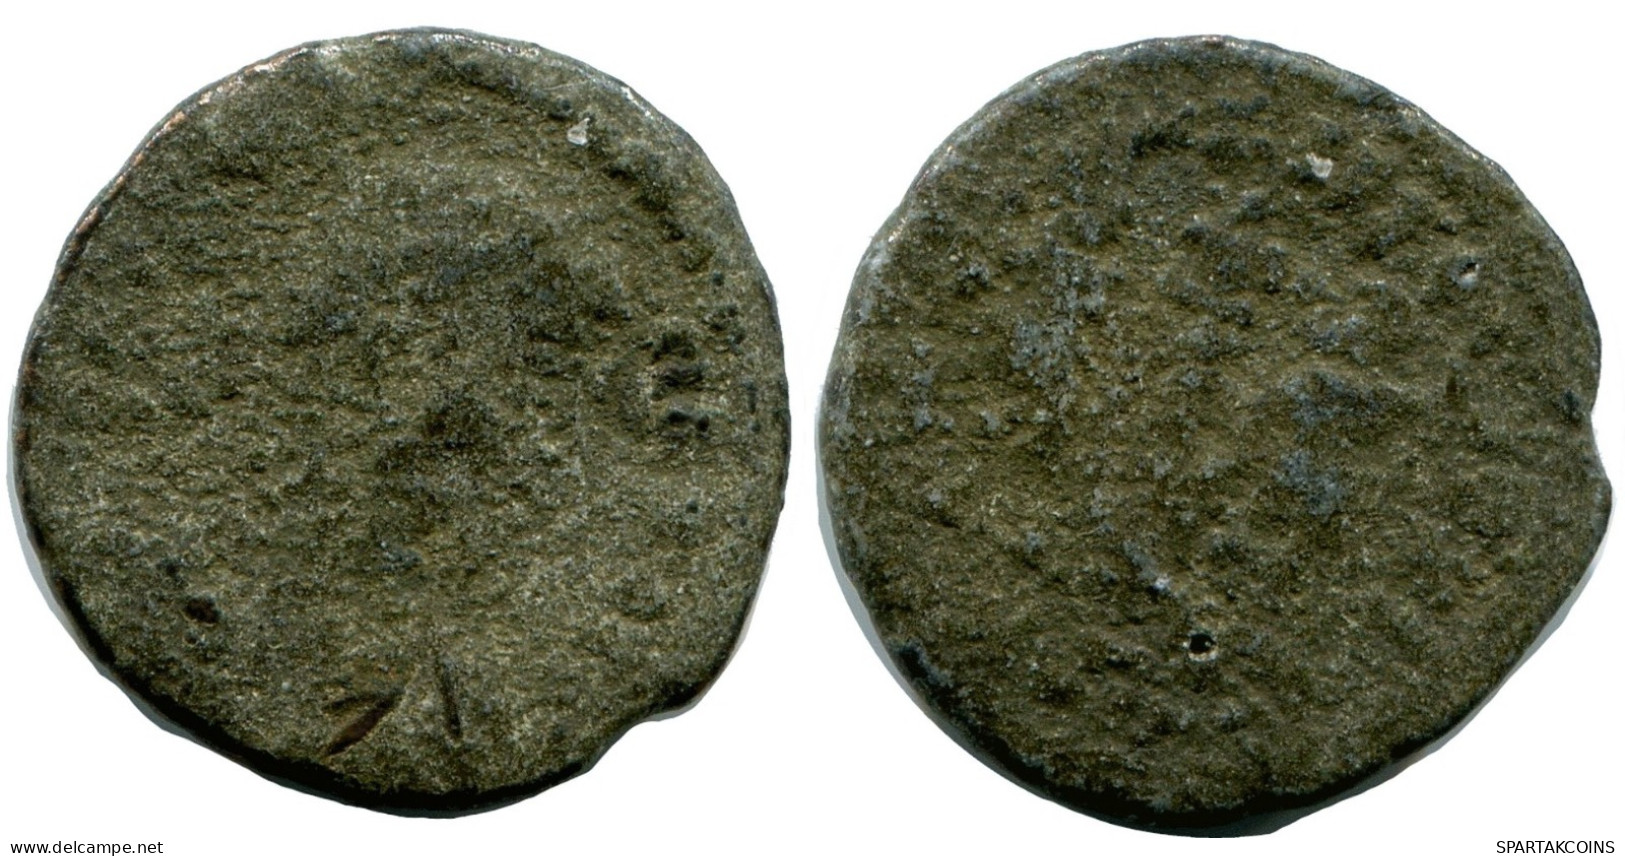 ROMAN Coin MINTED IN ALEKSANDRIA FROM THE ROYAL ONTARIO MUSEUM #ANC10186.14.D.A - El Imperio Christiano (307 / 363)